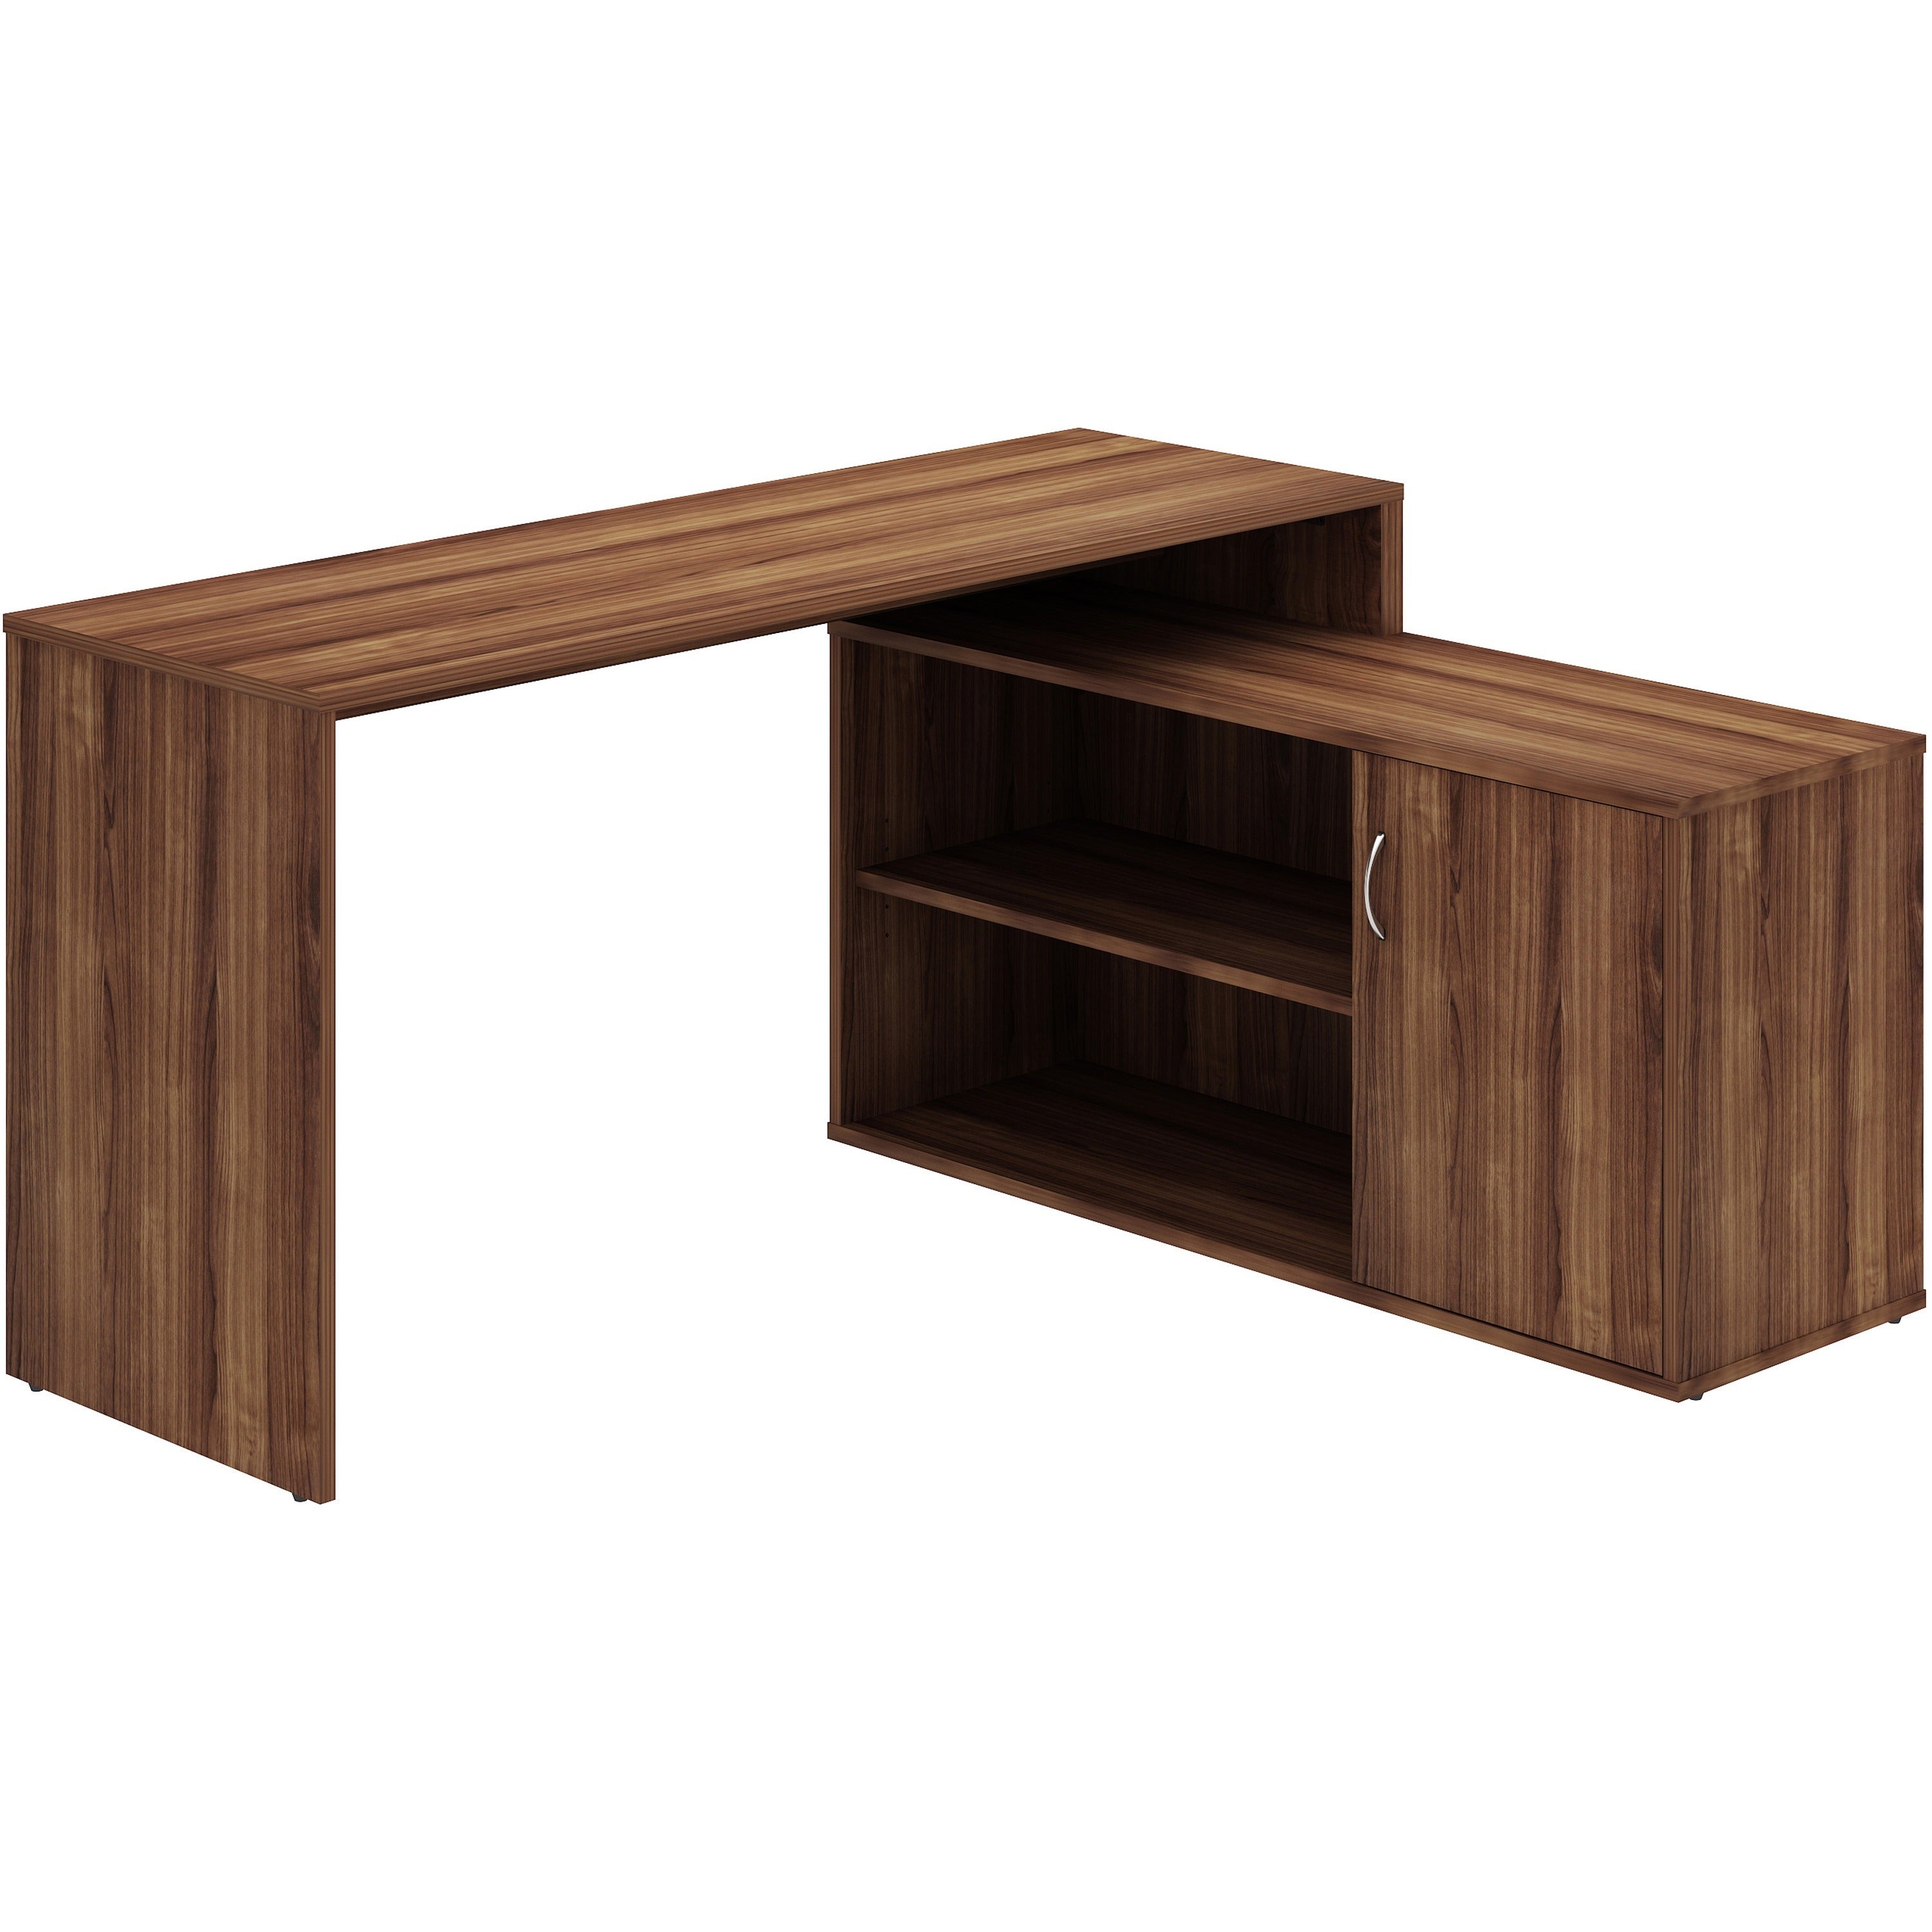 lys-l-shape-workstation-with-cabinet-for-table-toplaminated-l-shaped-top-200-lb-capacity-2950-height-x-60-width-x-4725-depth-assembly-required-walnut-particleboard-1-each_lysdk103rrwt - 1